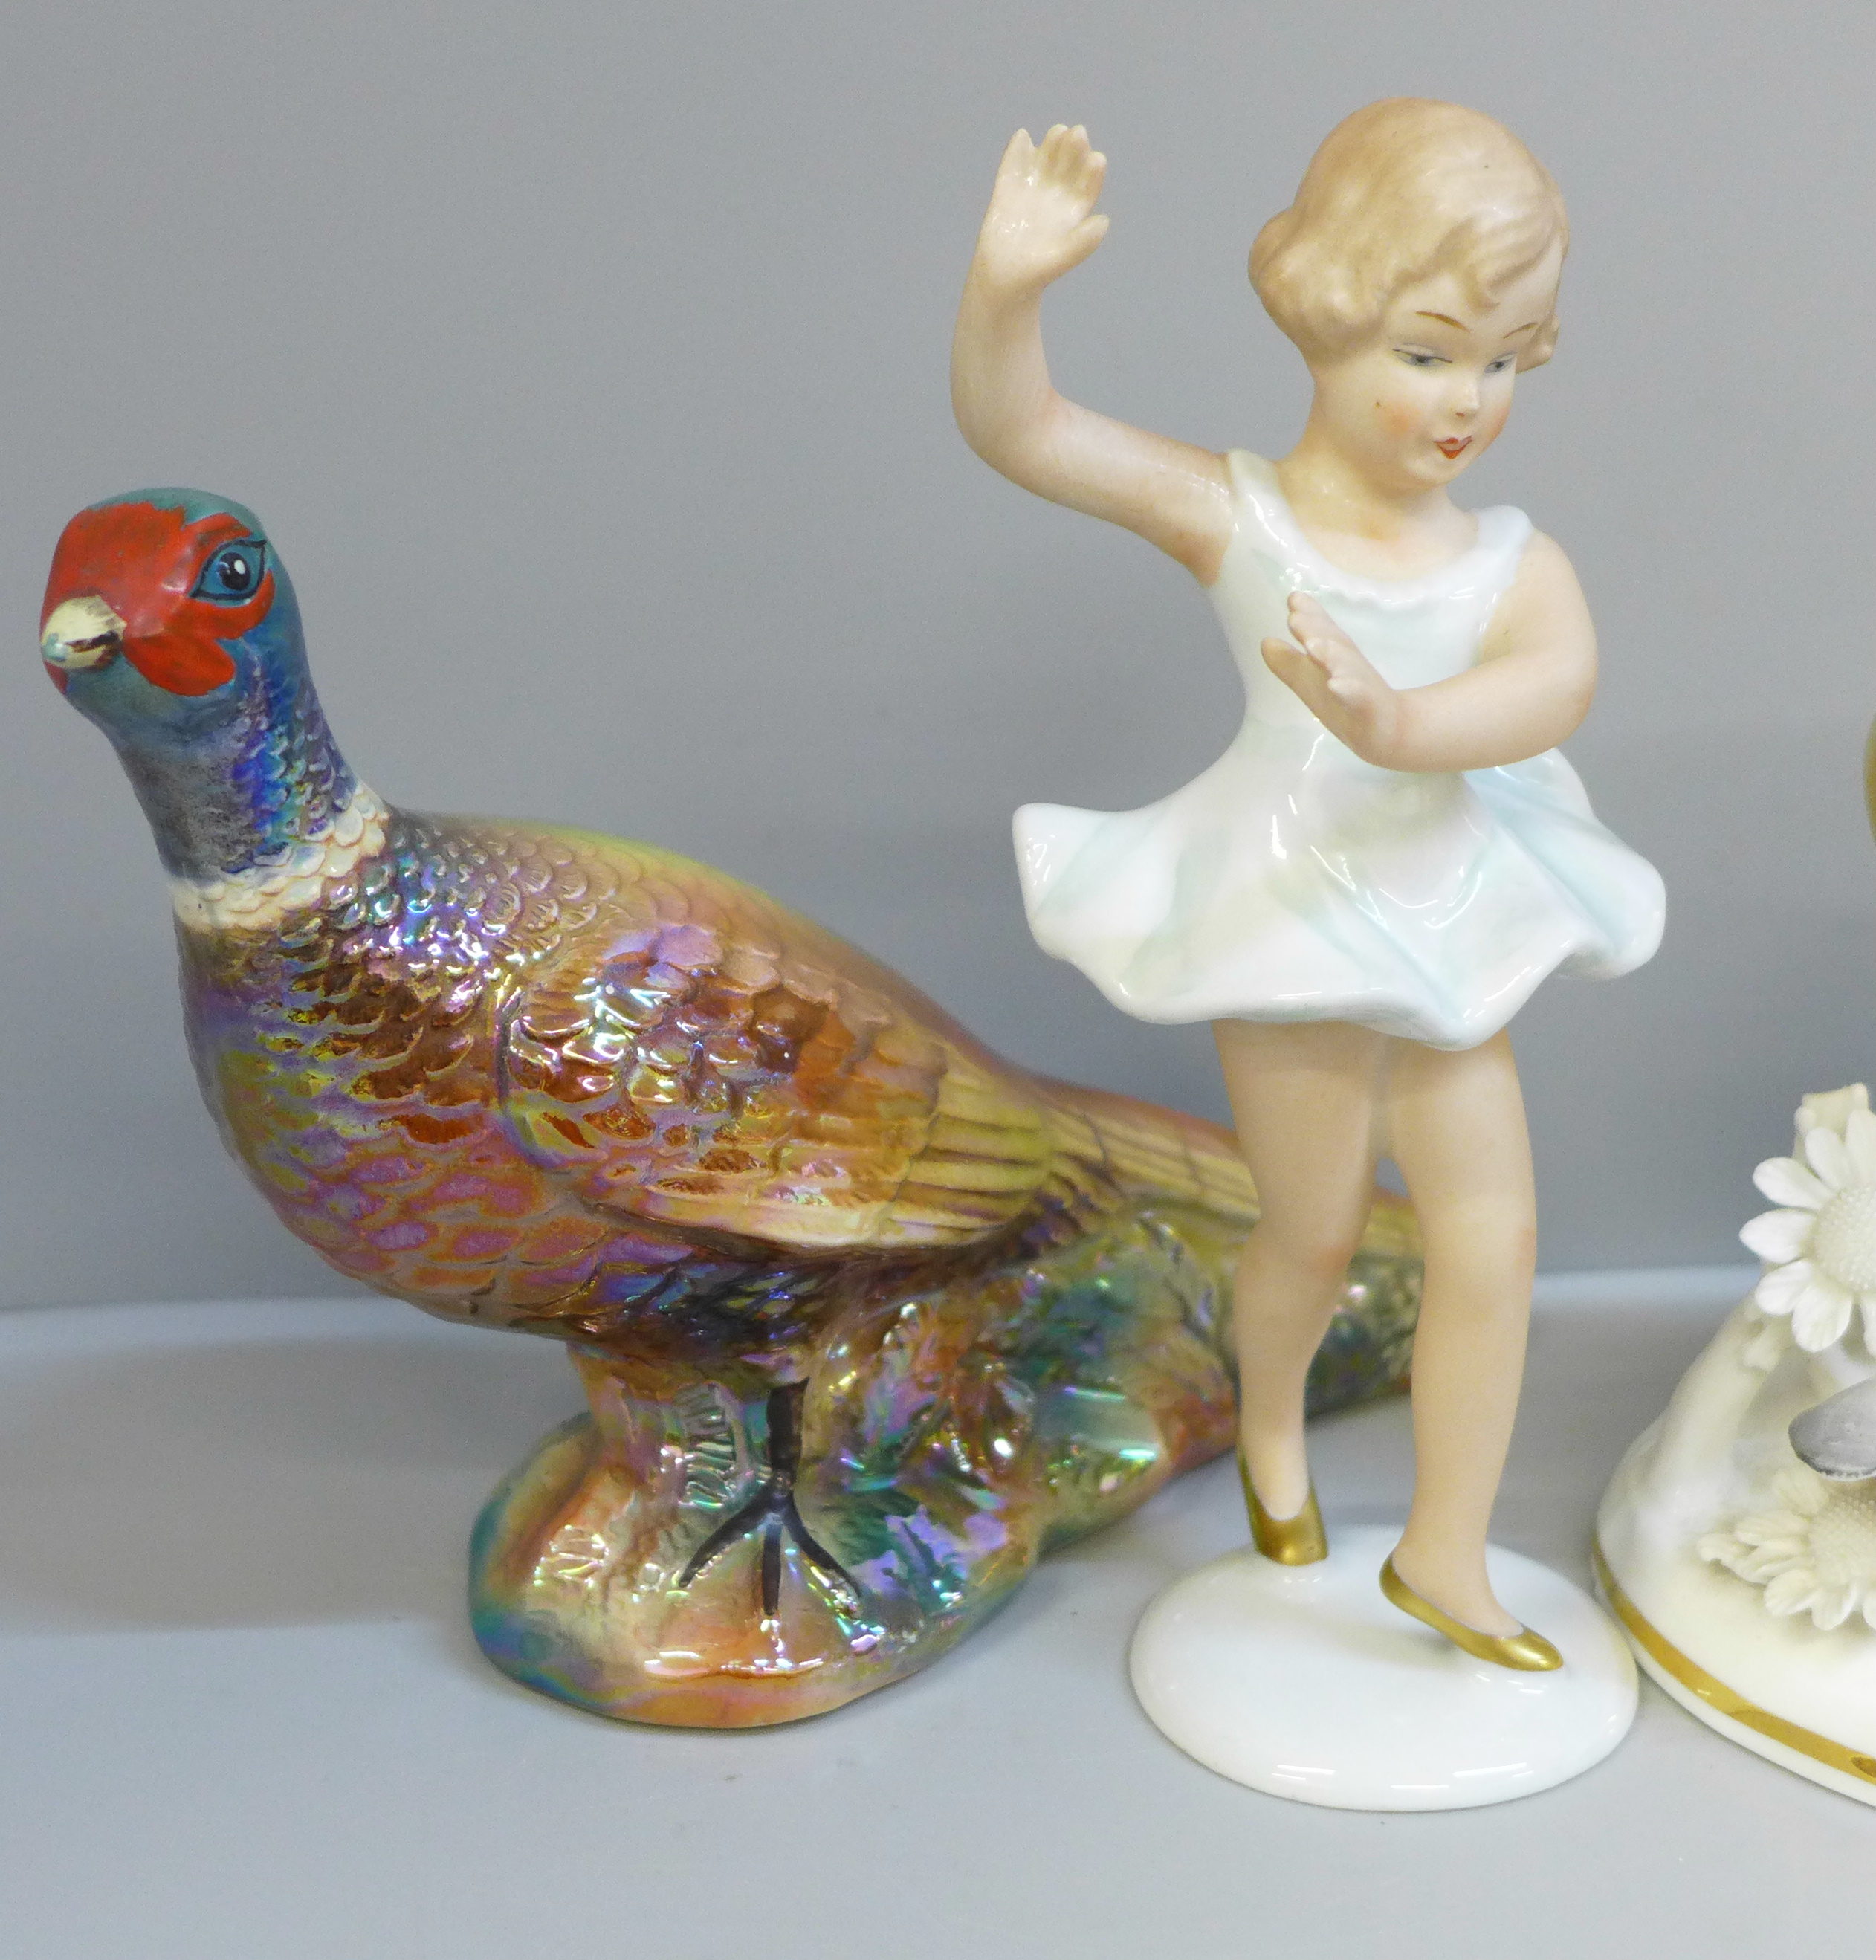 A KSP model of a pheasant, a small German porcelain figure of a dancer, a Staffordshire figure of - Image 2 of 6